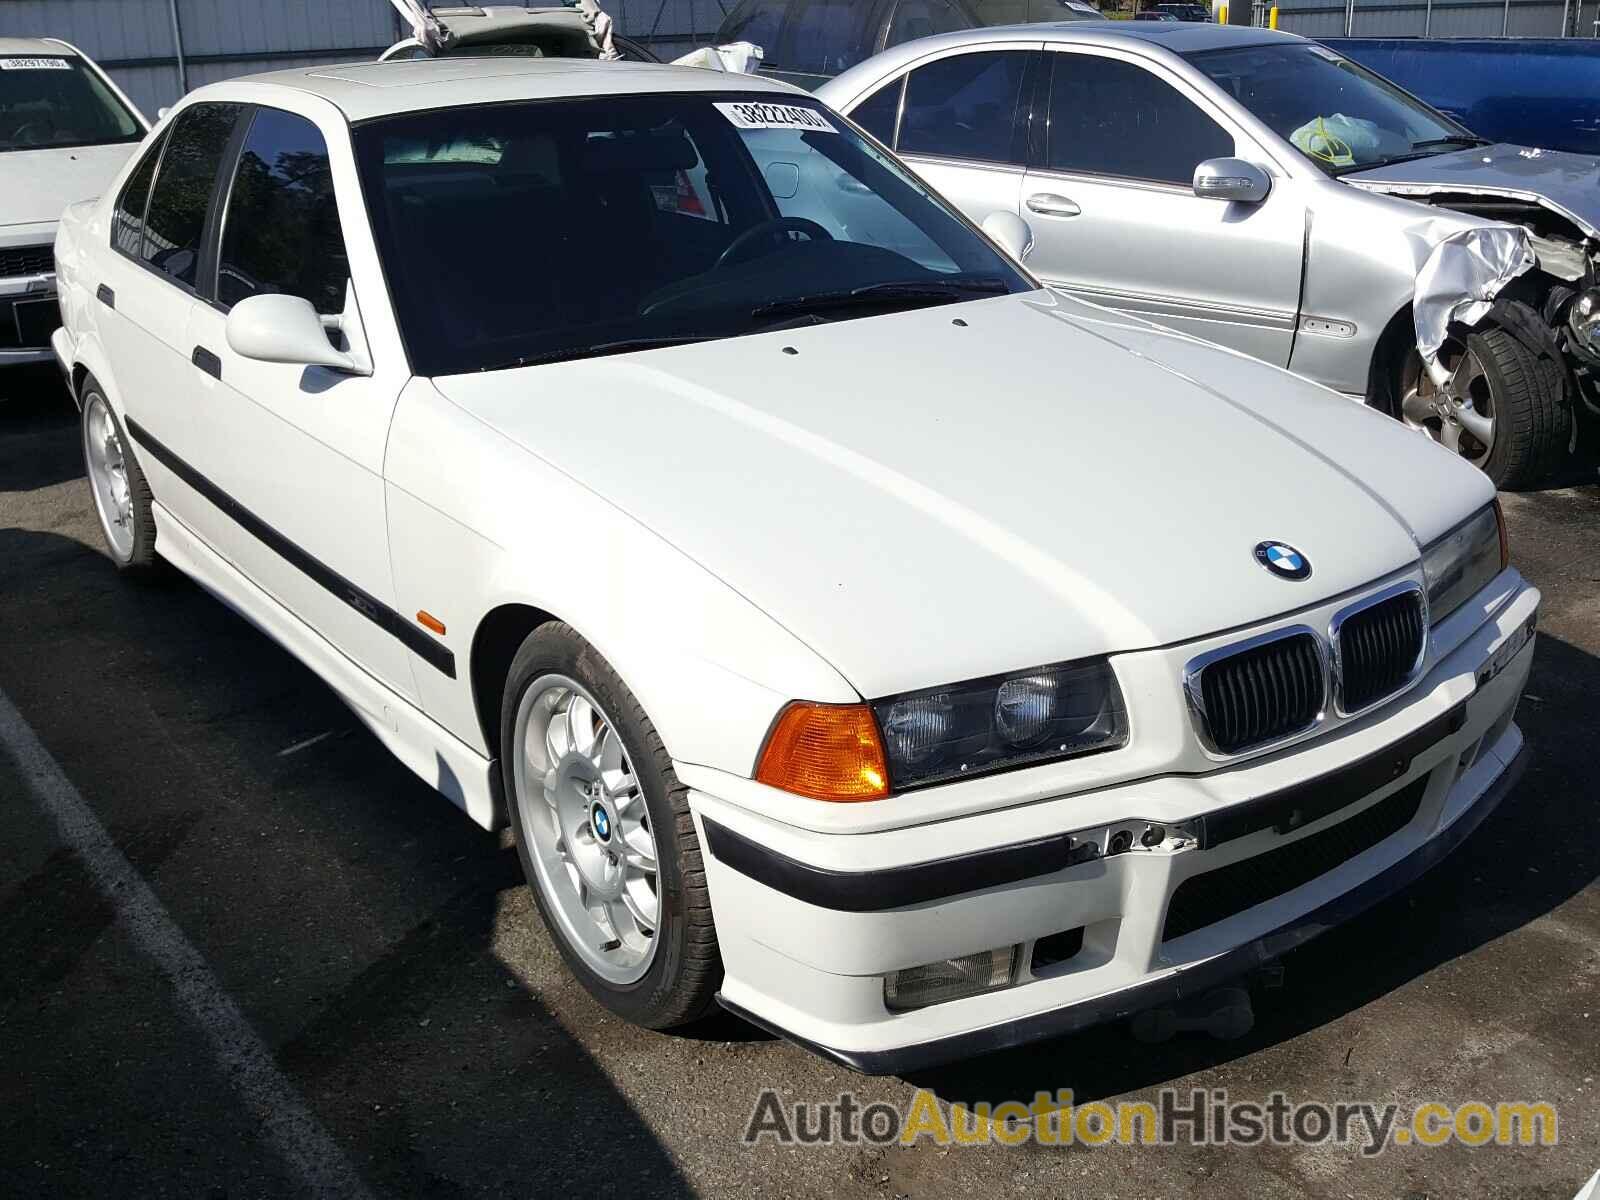 1997 BMW M3 AUTOMATIC, WBSCD032XVEE11166